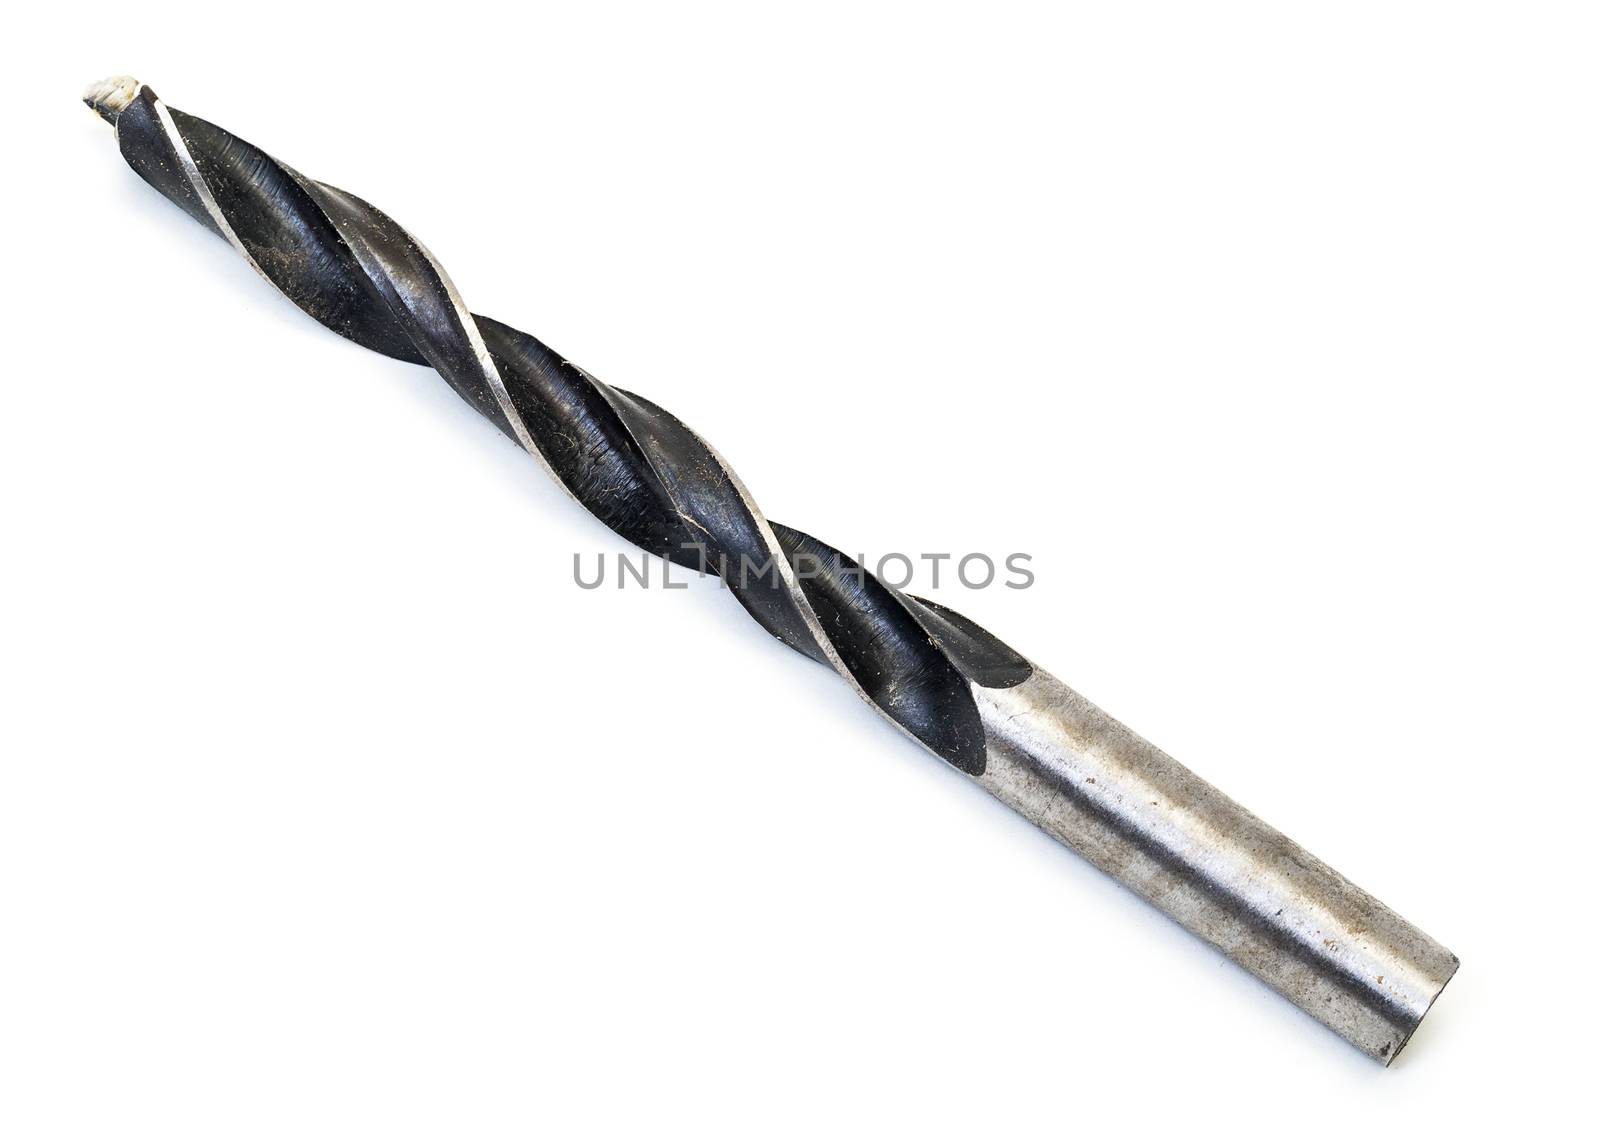 One Drill Bit, isolated on white background